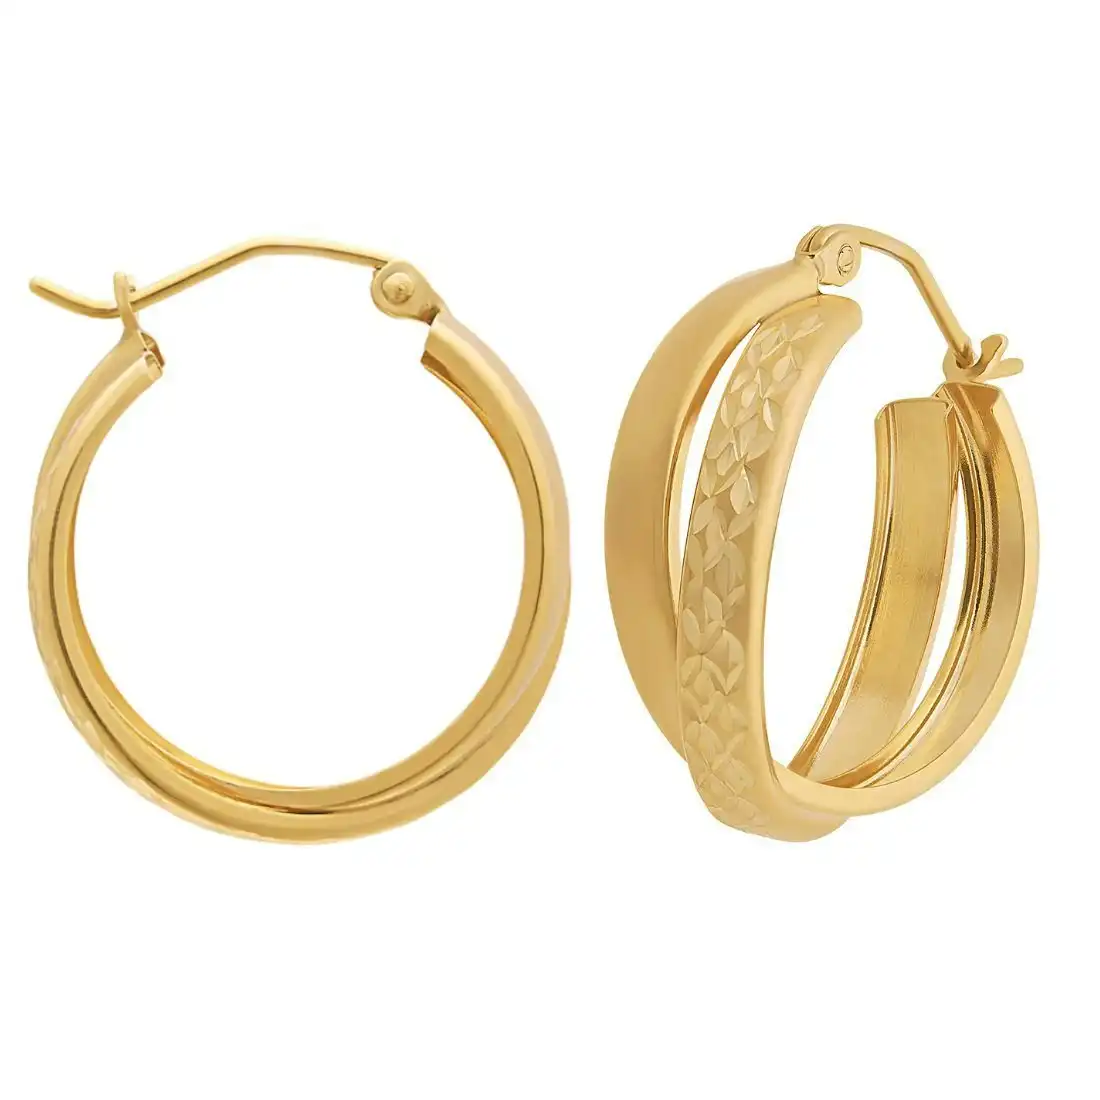 9ct Yellow Gold Silver Infused Double Hoop Earrings 3mm x 21mm